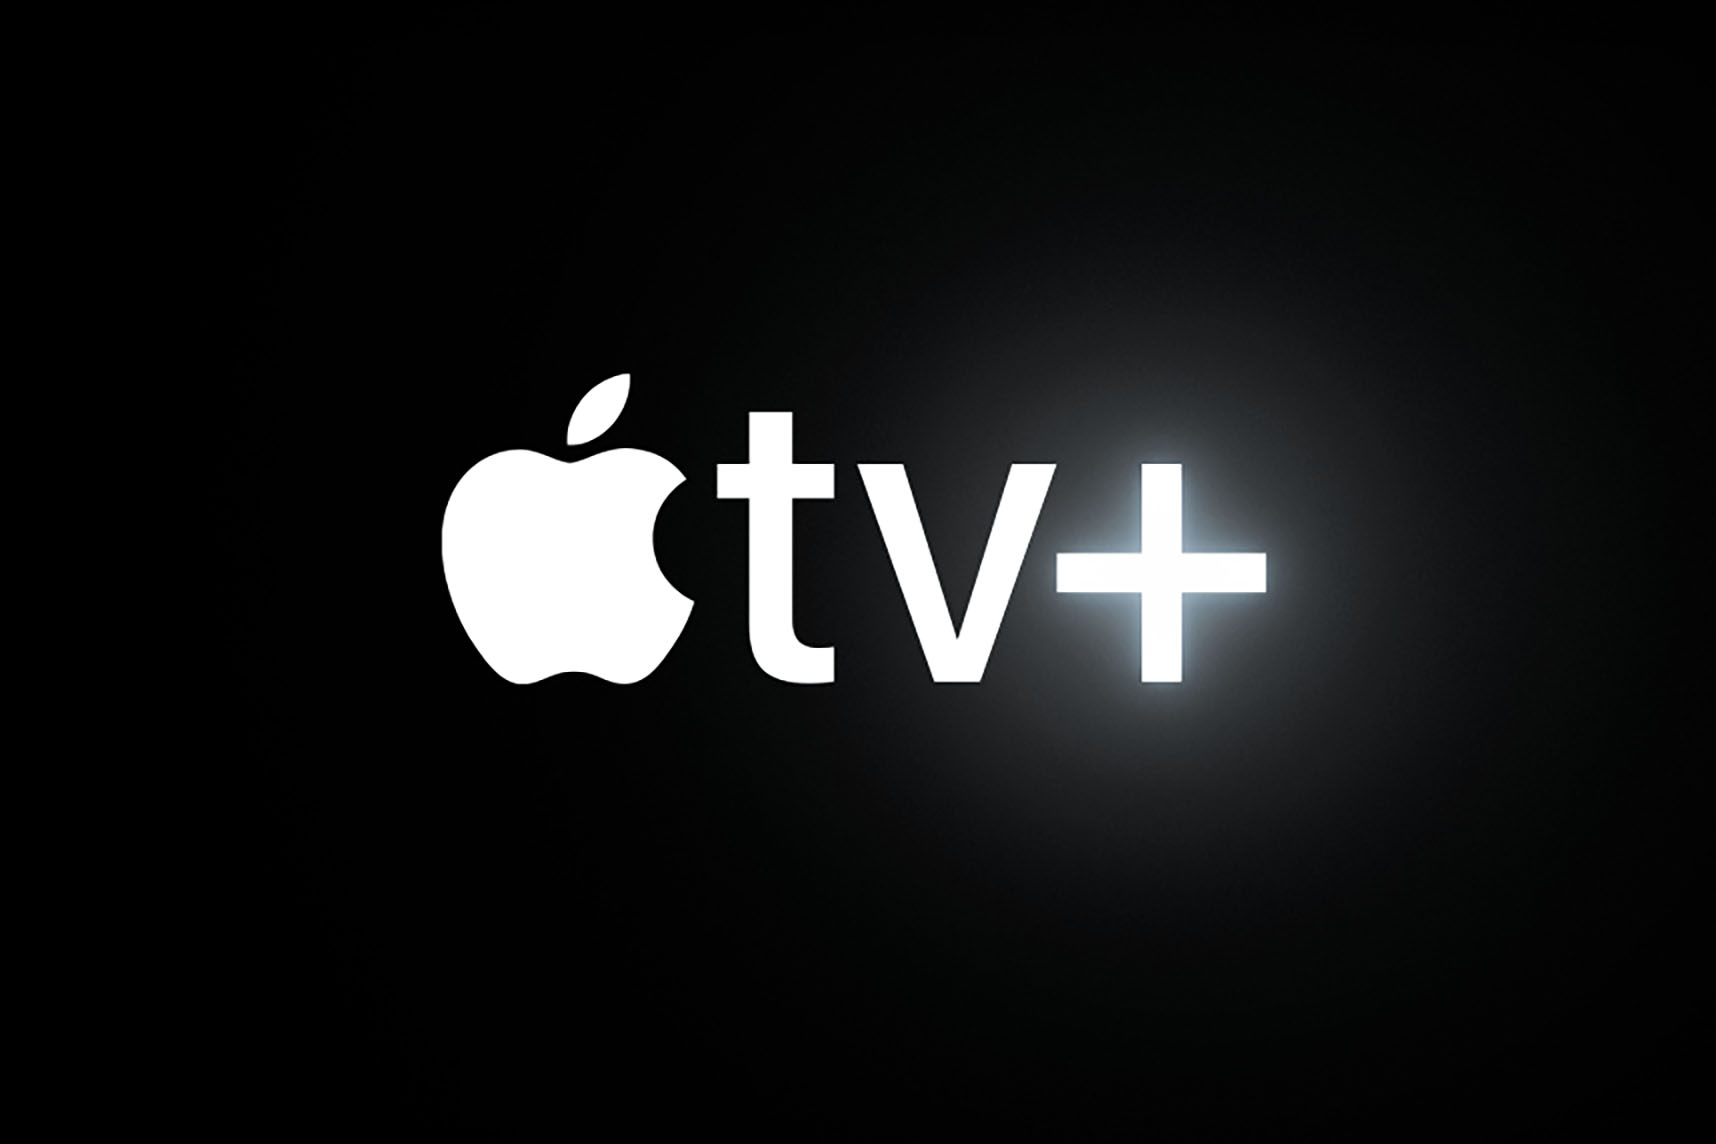 The free ride is over: Apple will soon start charging for TV+